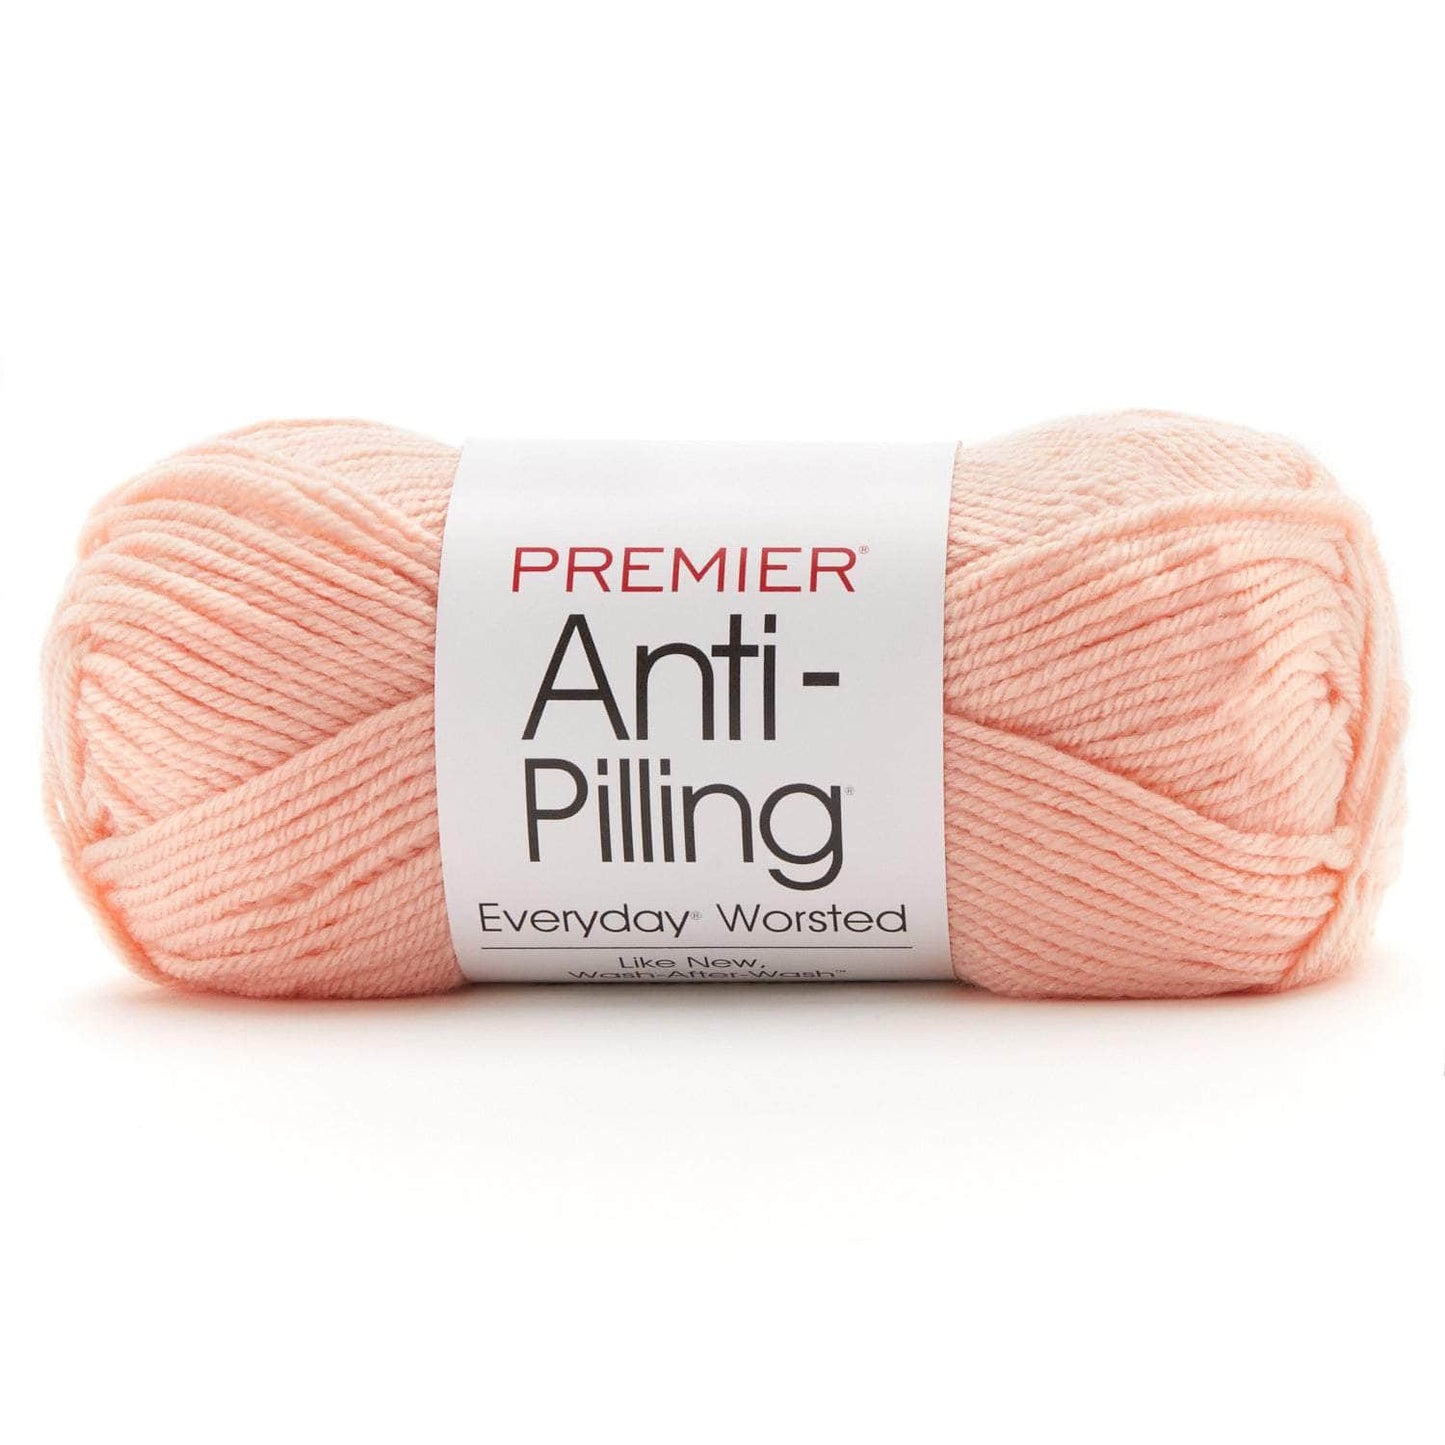 Premier Anti-Pilling Everyday Worsted Yarn Soft Peach Pack of 3 *Pre-order*